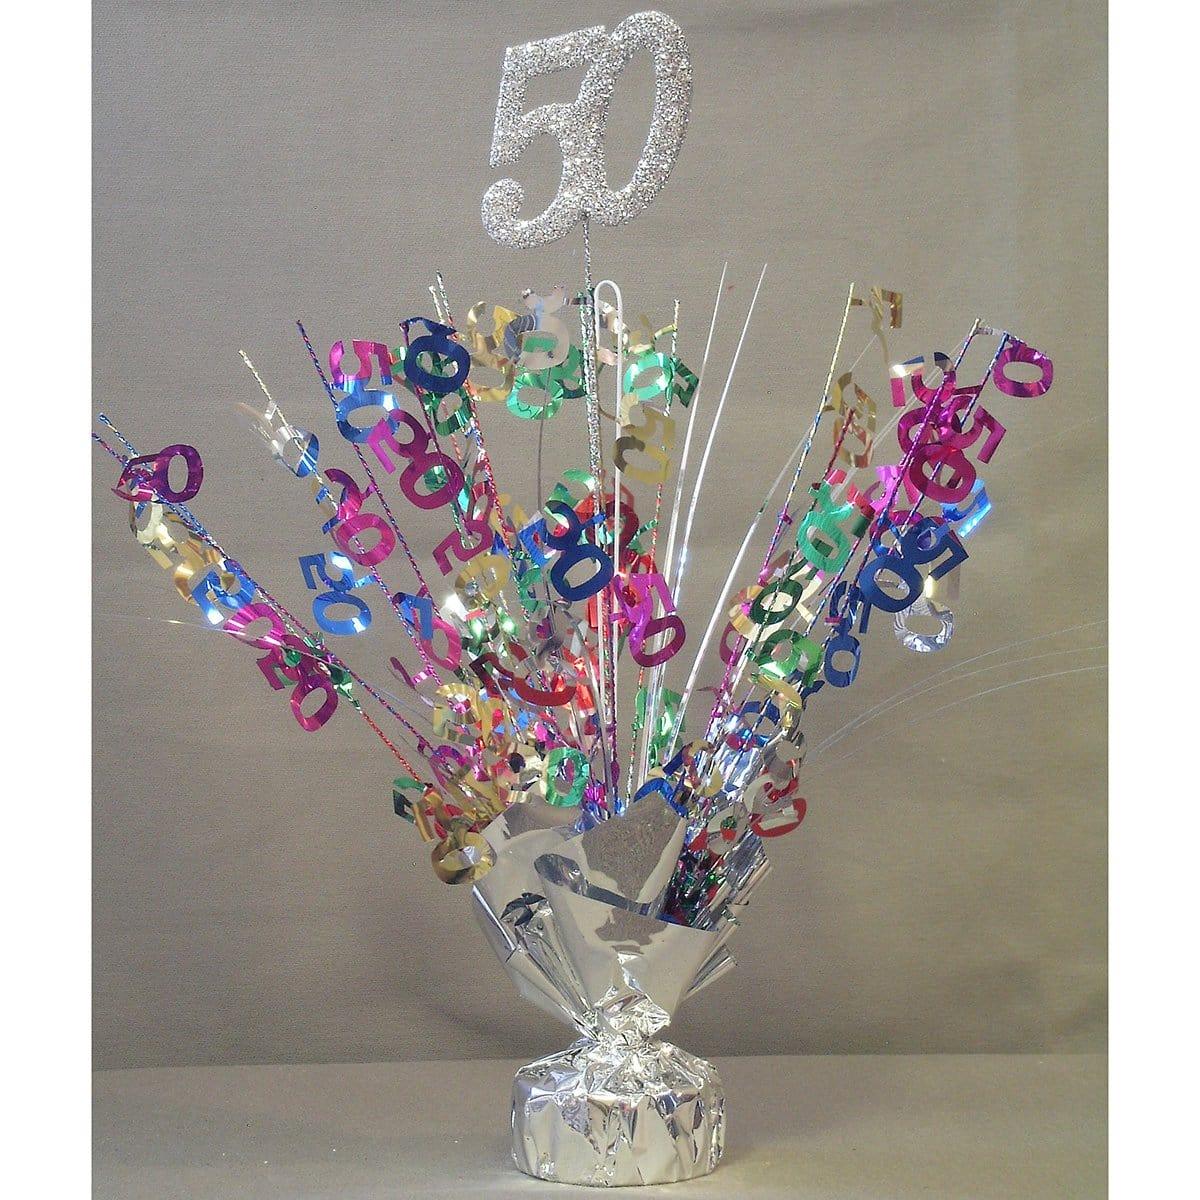 Buy Balloons #50 Silver Balloon Weight / Centerpiece sold at Party Expert